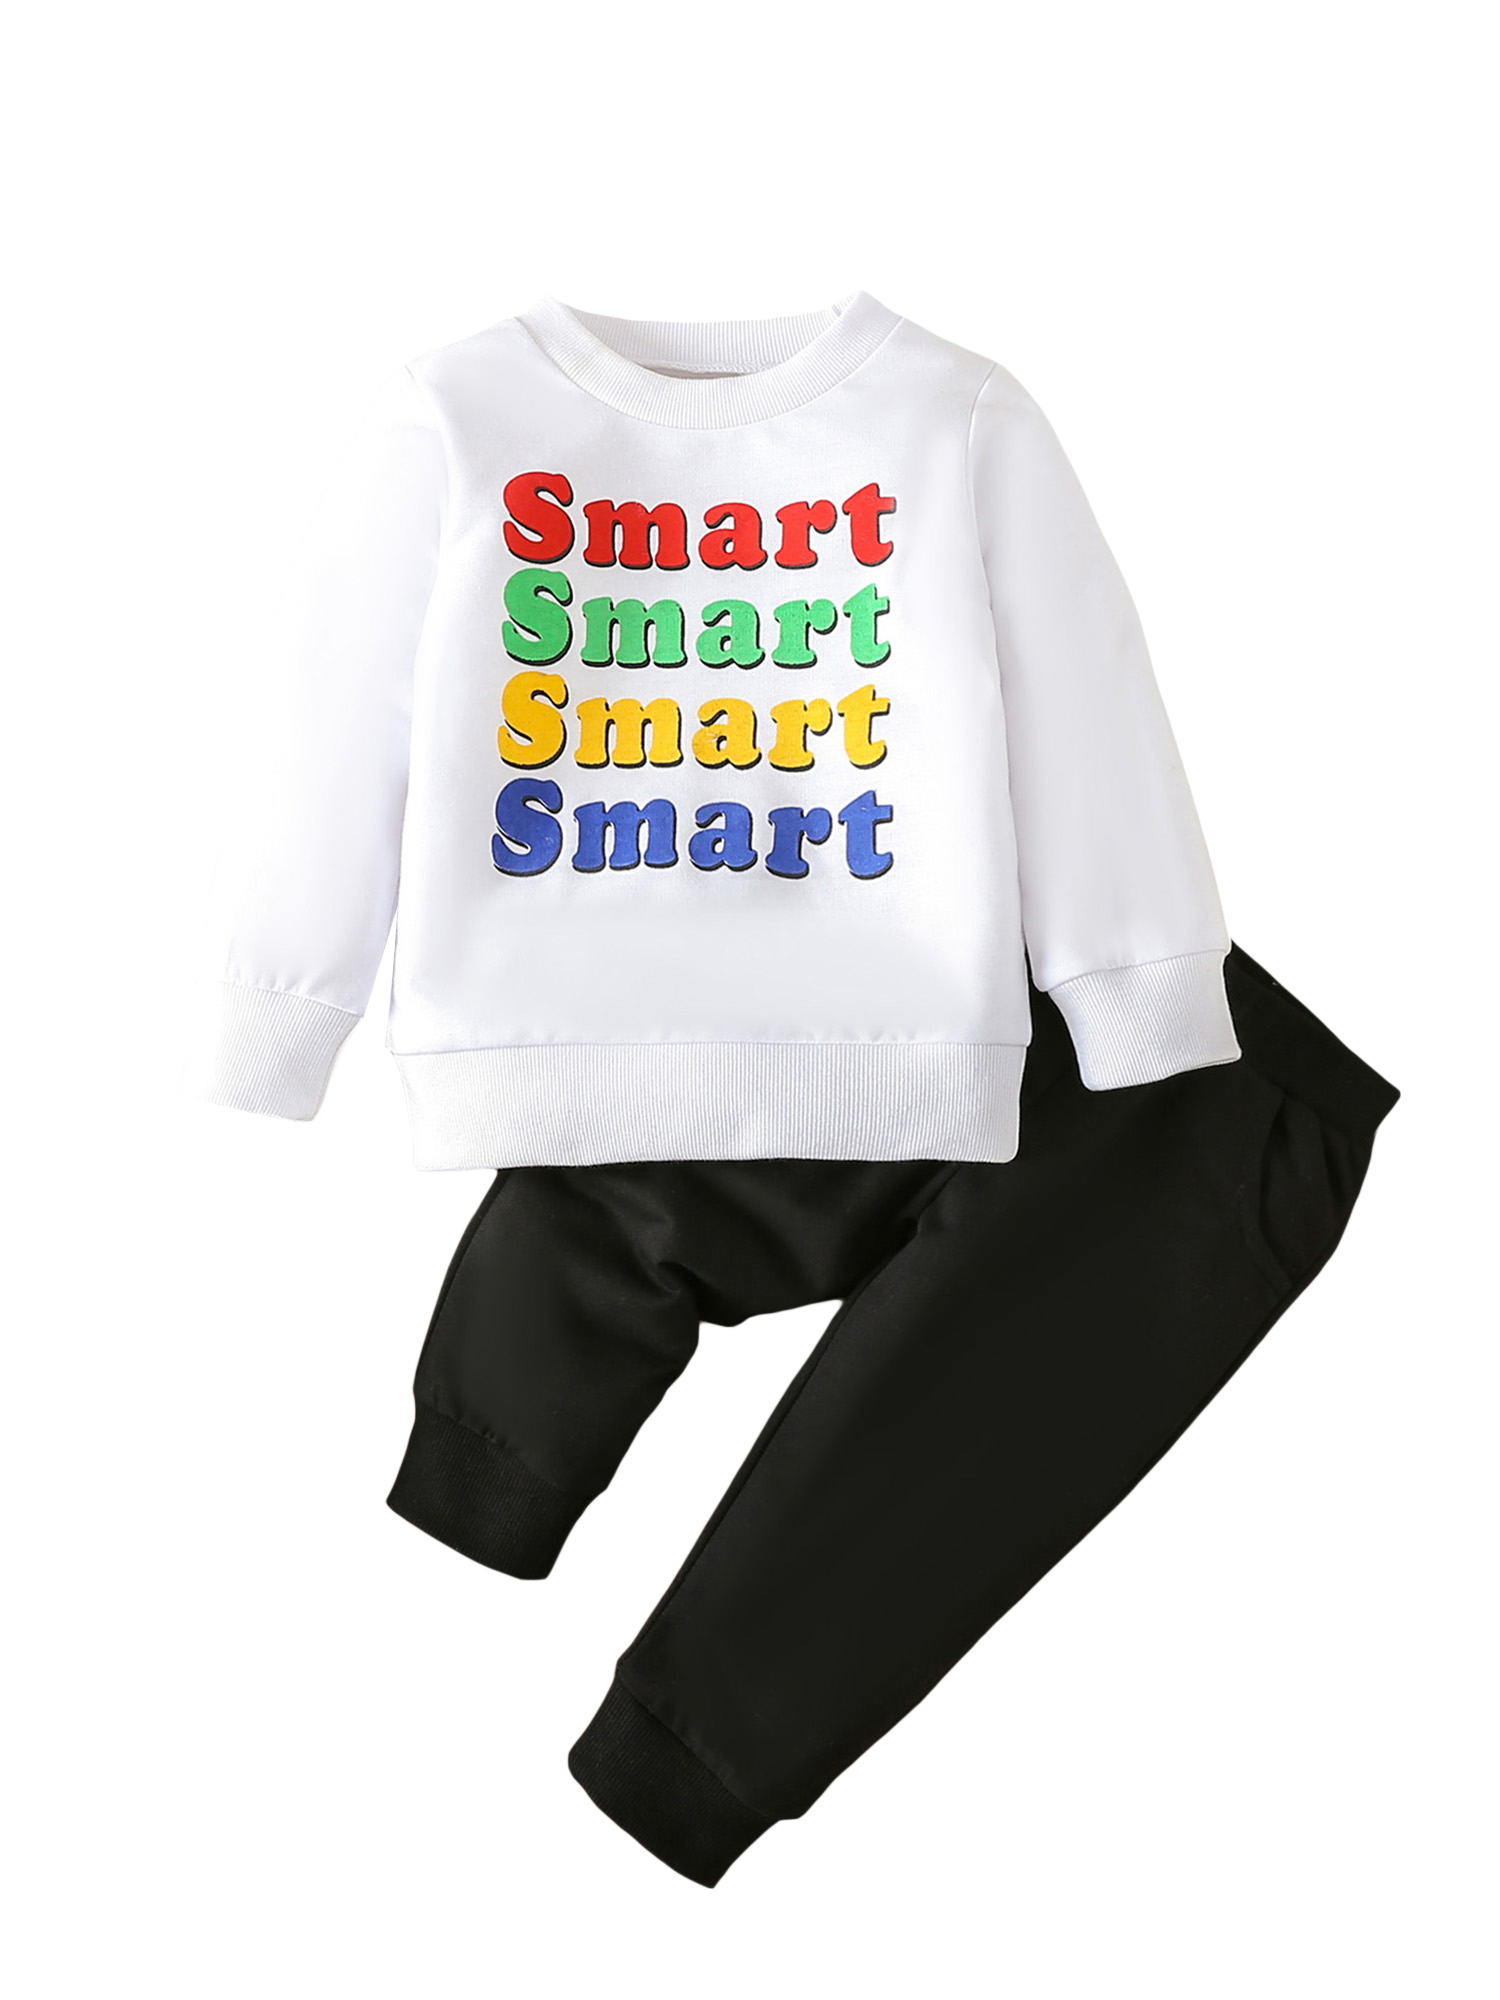 CenturyX Toddler Boys Long Sleeve Letter Print Tops and Black Pants ...